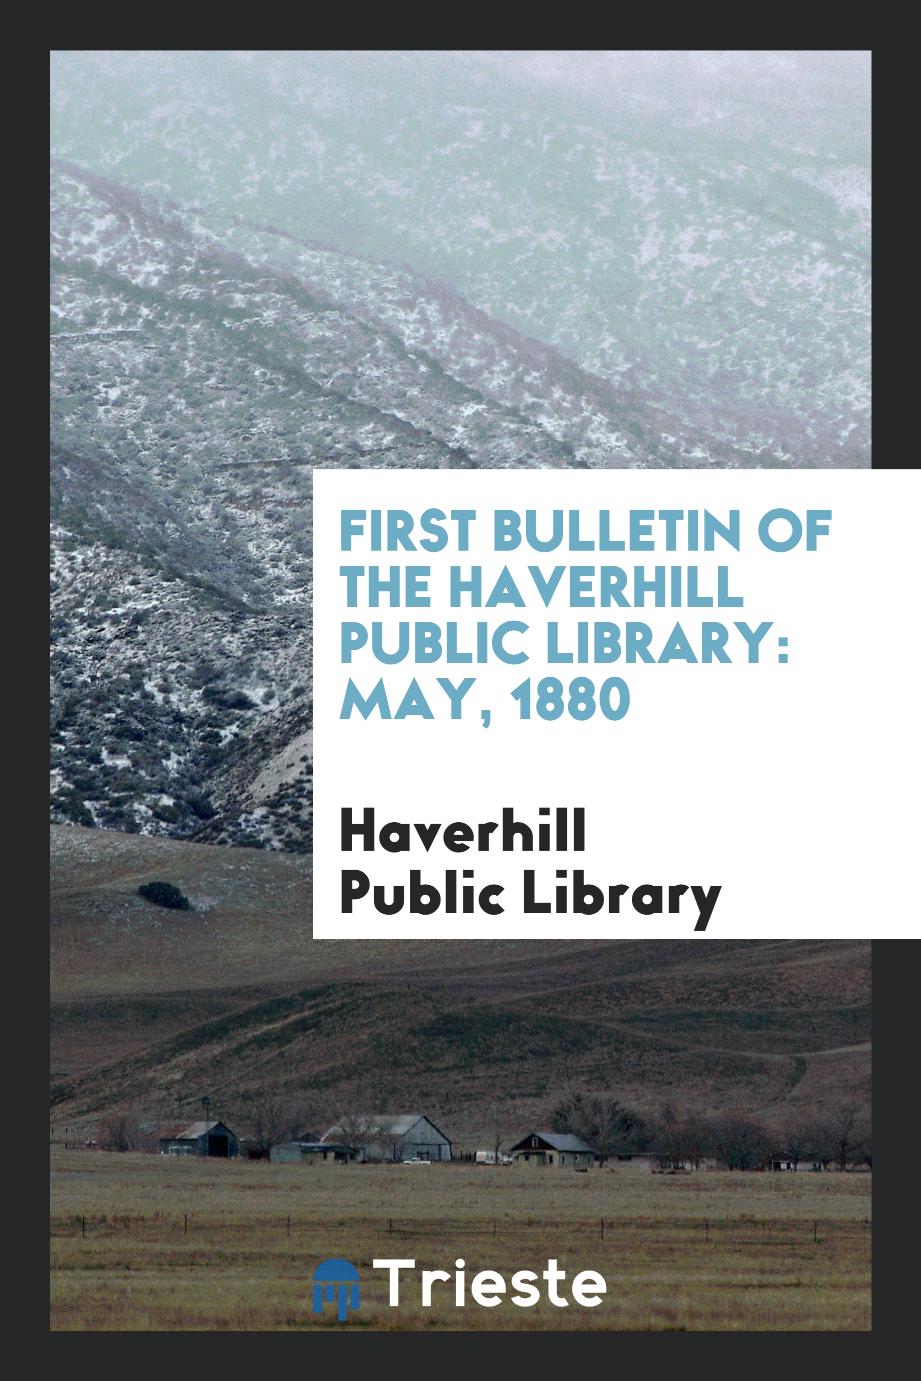 First Bulletin of the Haverhill Public Library: May, 1880